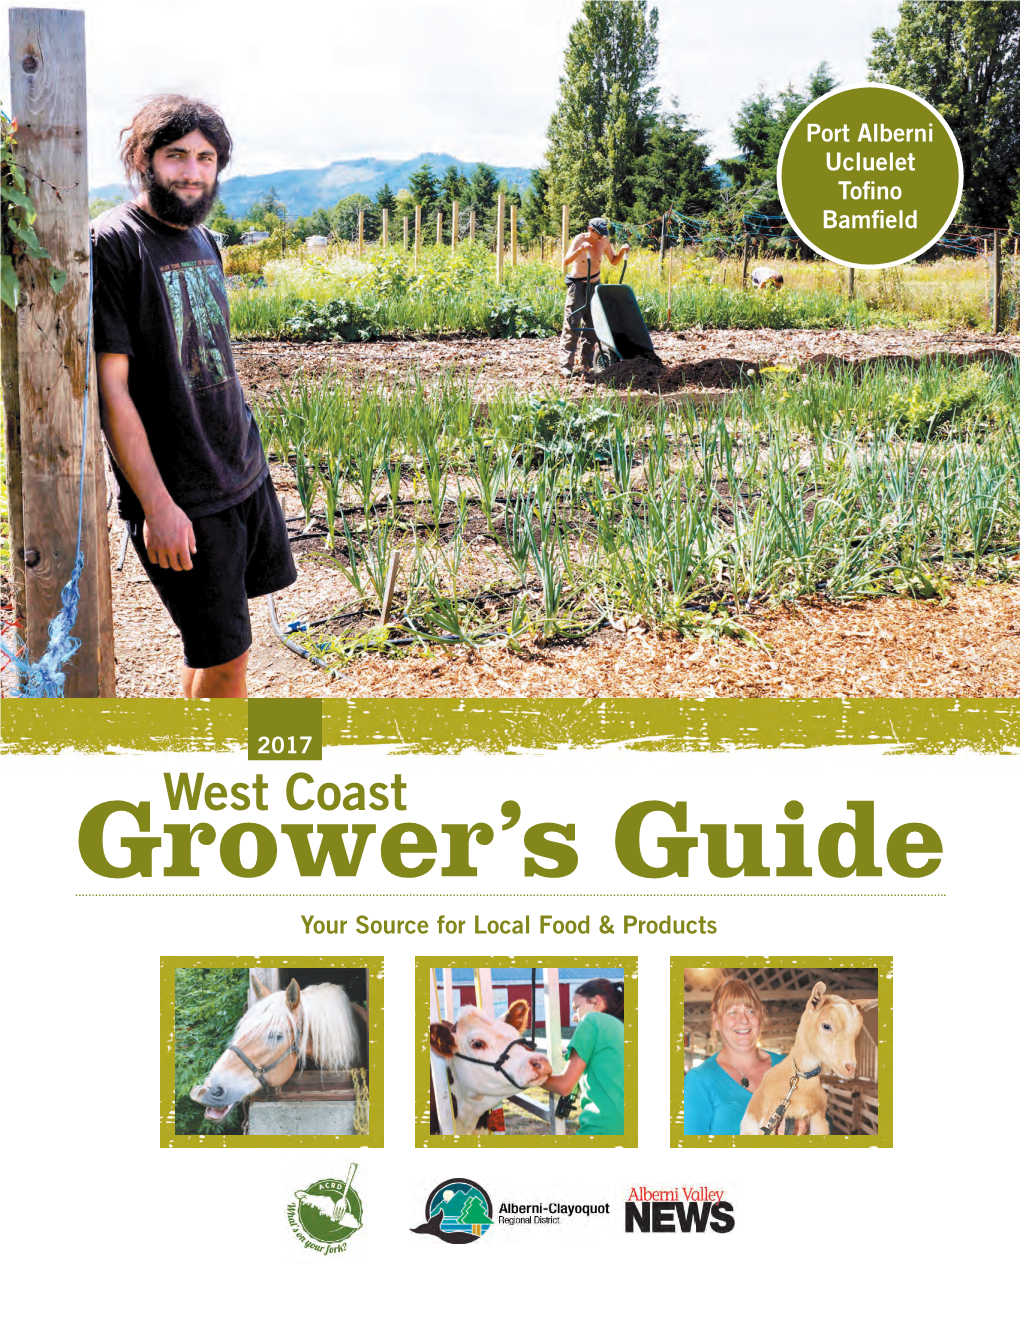 West Coast Growers' Guide